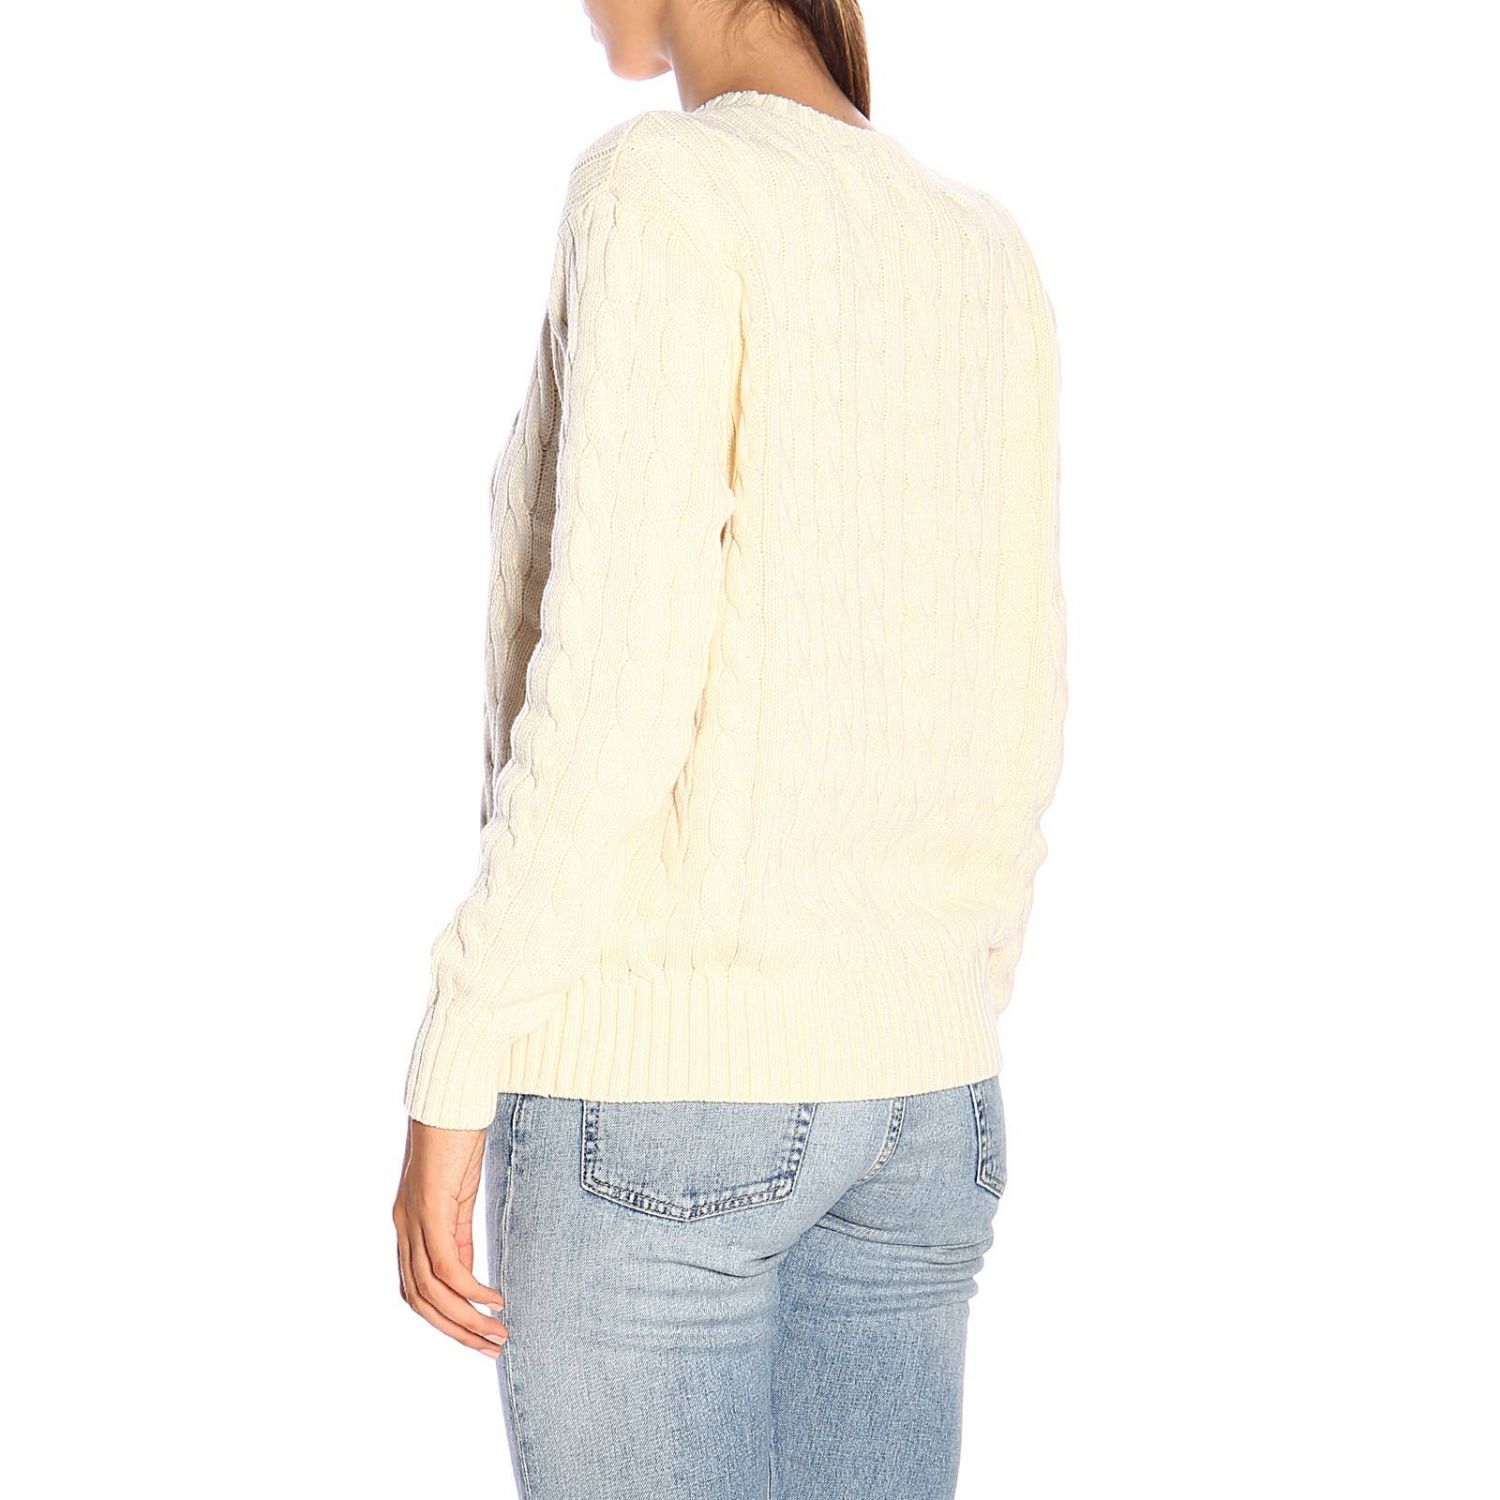 Polo Ralph Lauren Outlet: Crew-neck pullover in braided fabric with ...